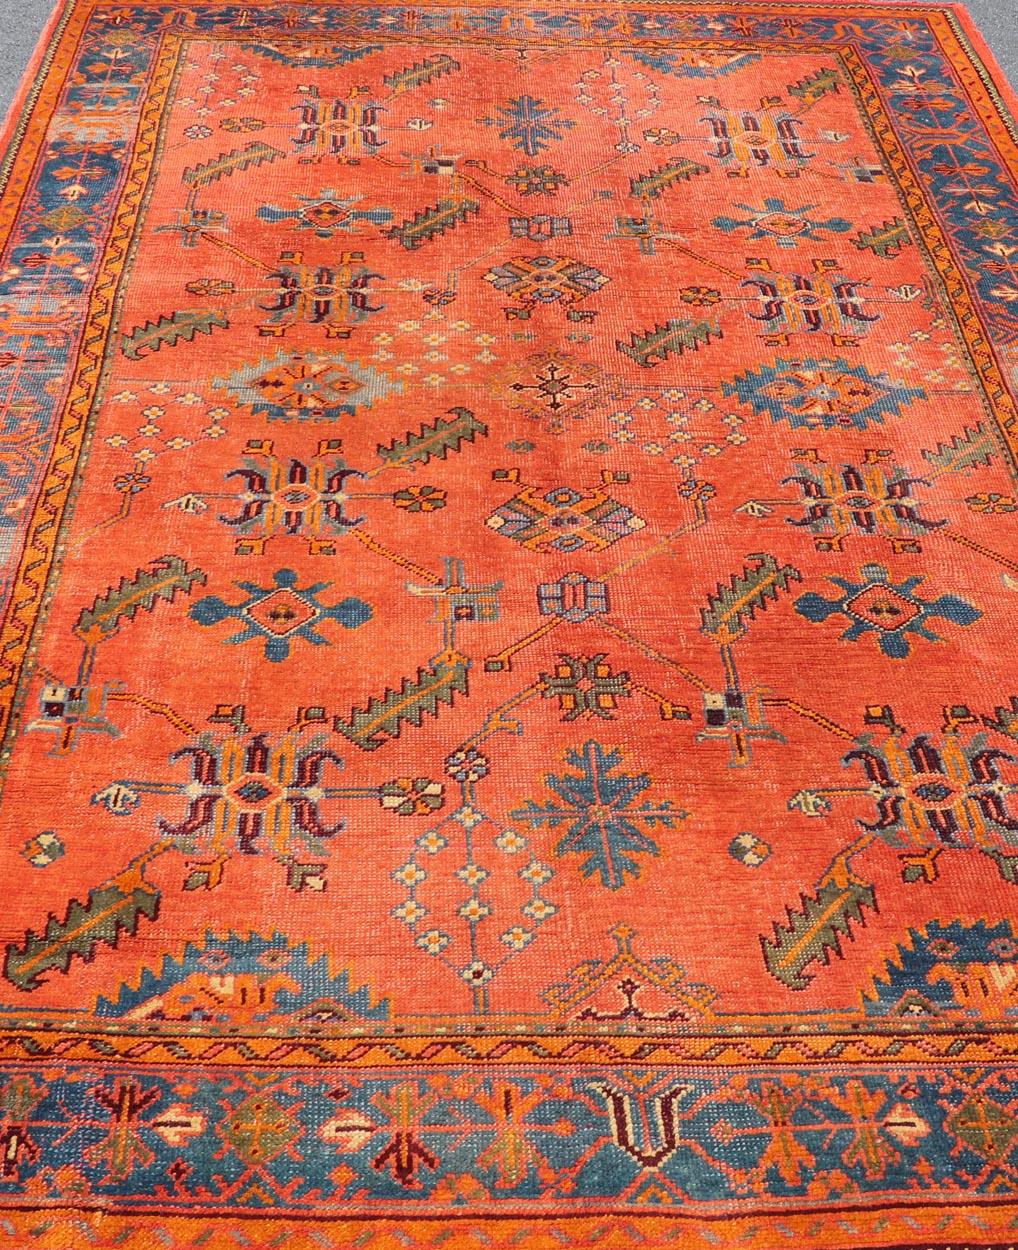 Antique Turkish Oushak Colorful Rug With All-Over Design In Salmon and Blue's.  Keivan Woven Arts; rug EN-141817, Country of Origin: Turkey Type: Antique Oushak Design: Floral, Sub-Geometric, All-Over.
Measures: 7'9 x 12'4.

Vibrant flowers and